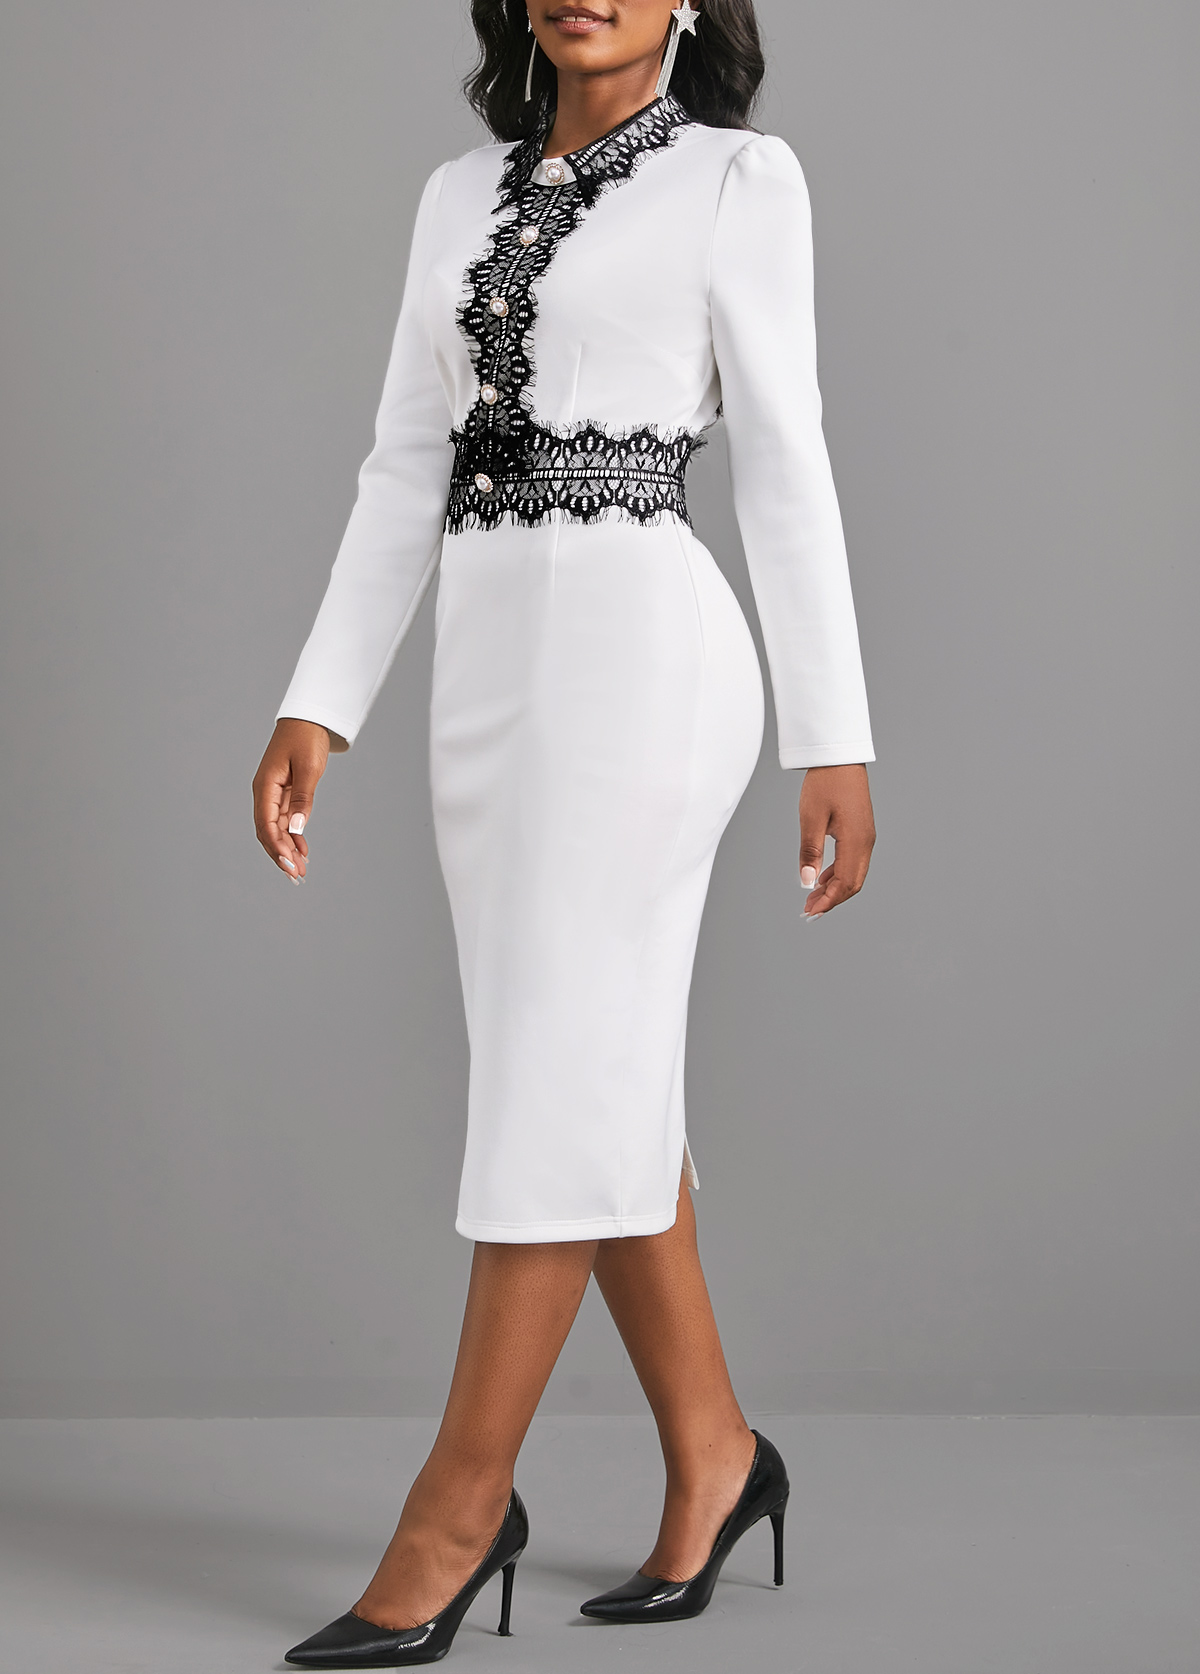 Lace Patchwork Long Sleeve White Dress